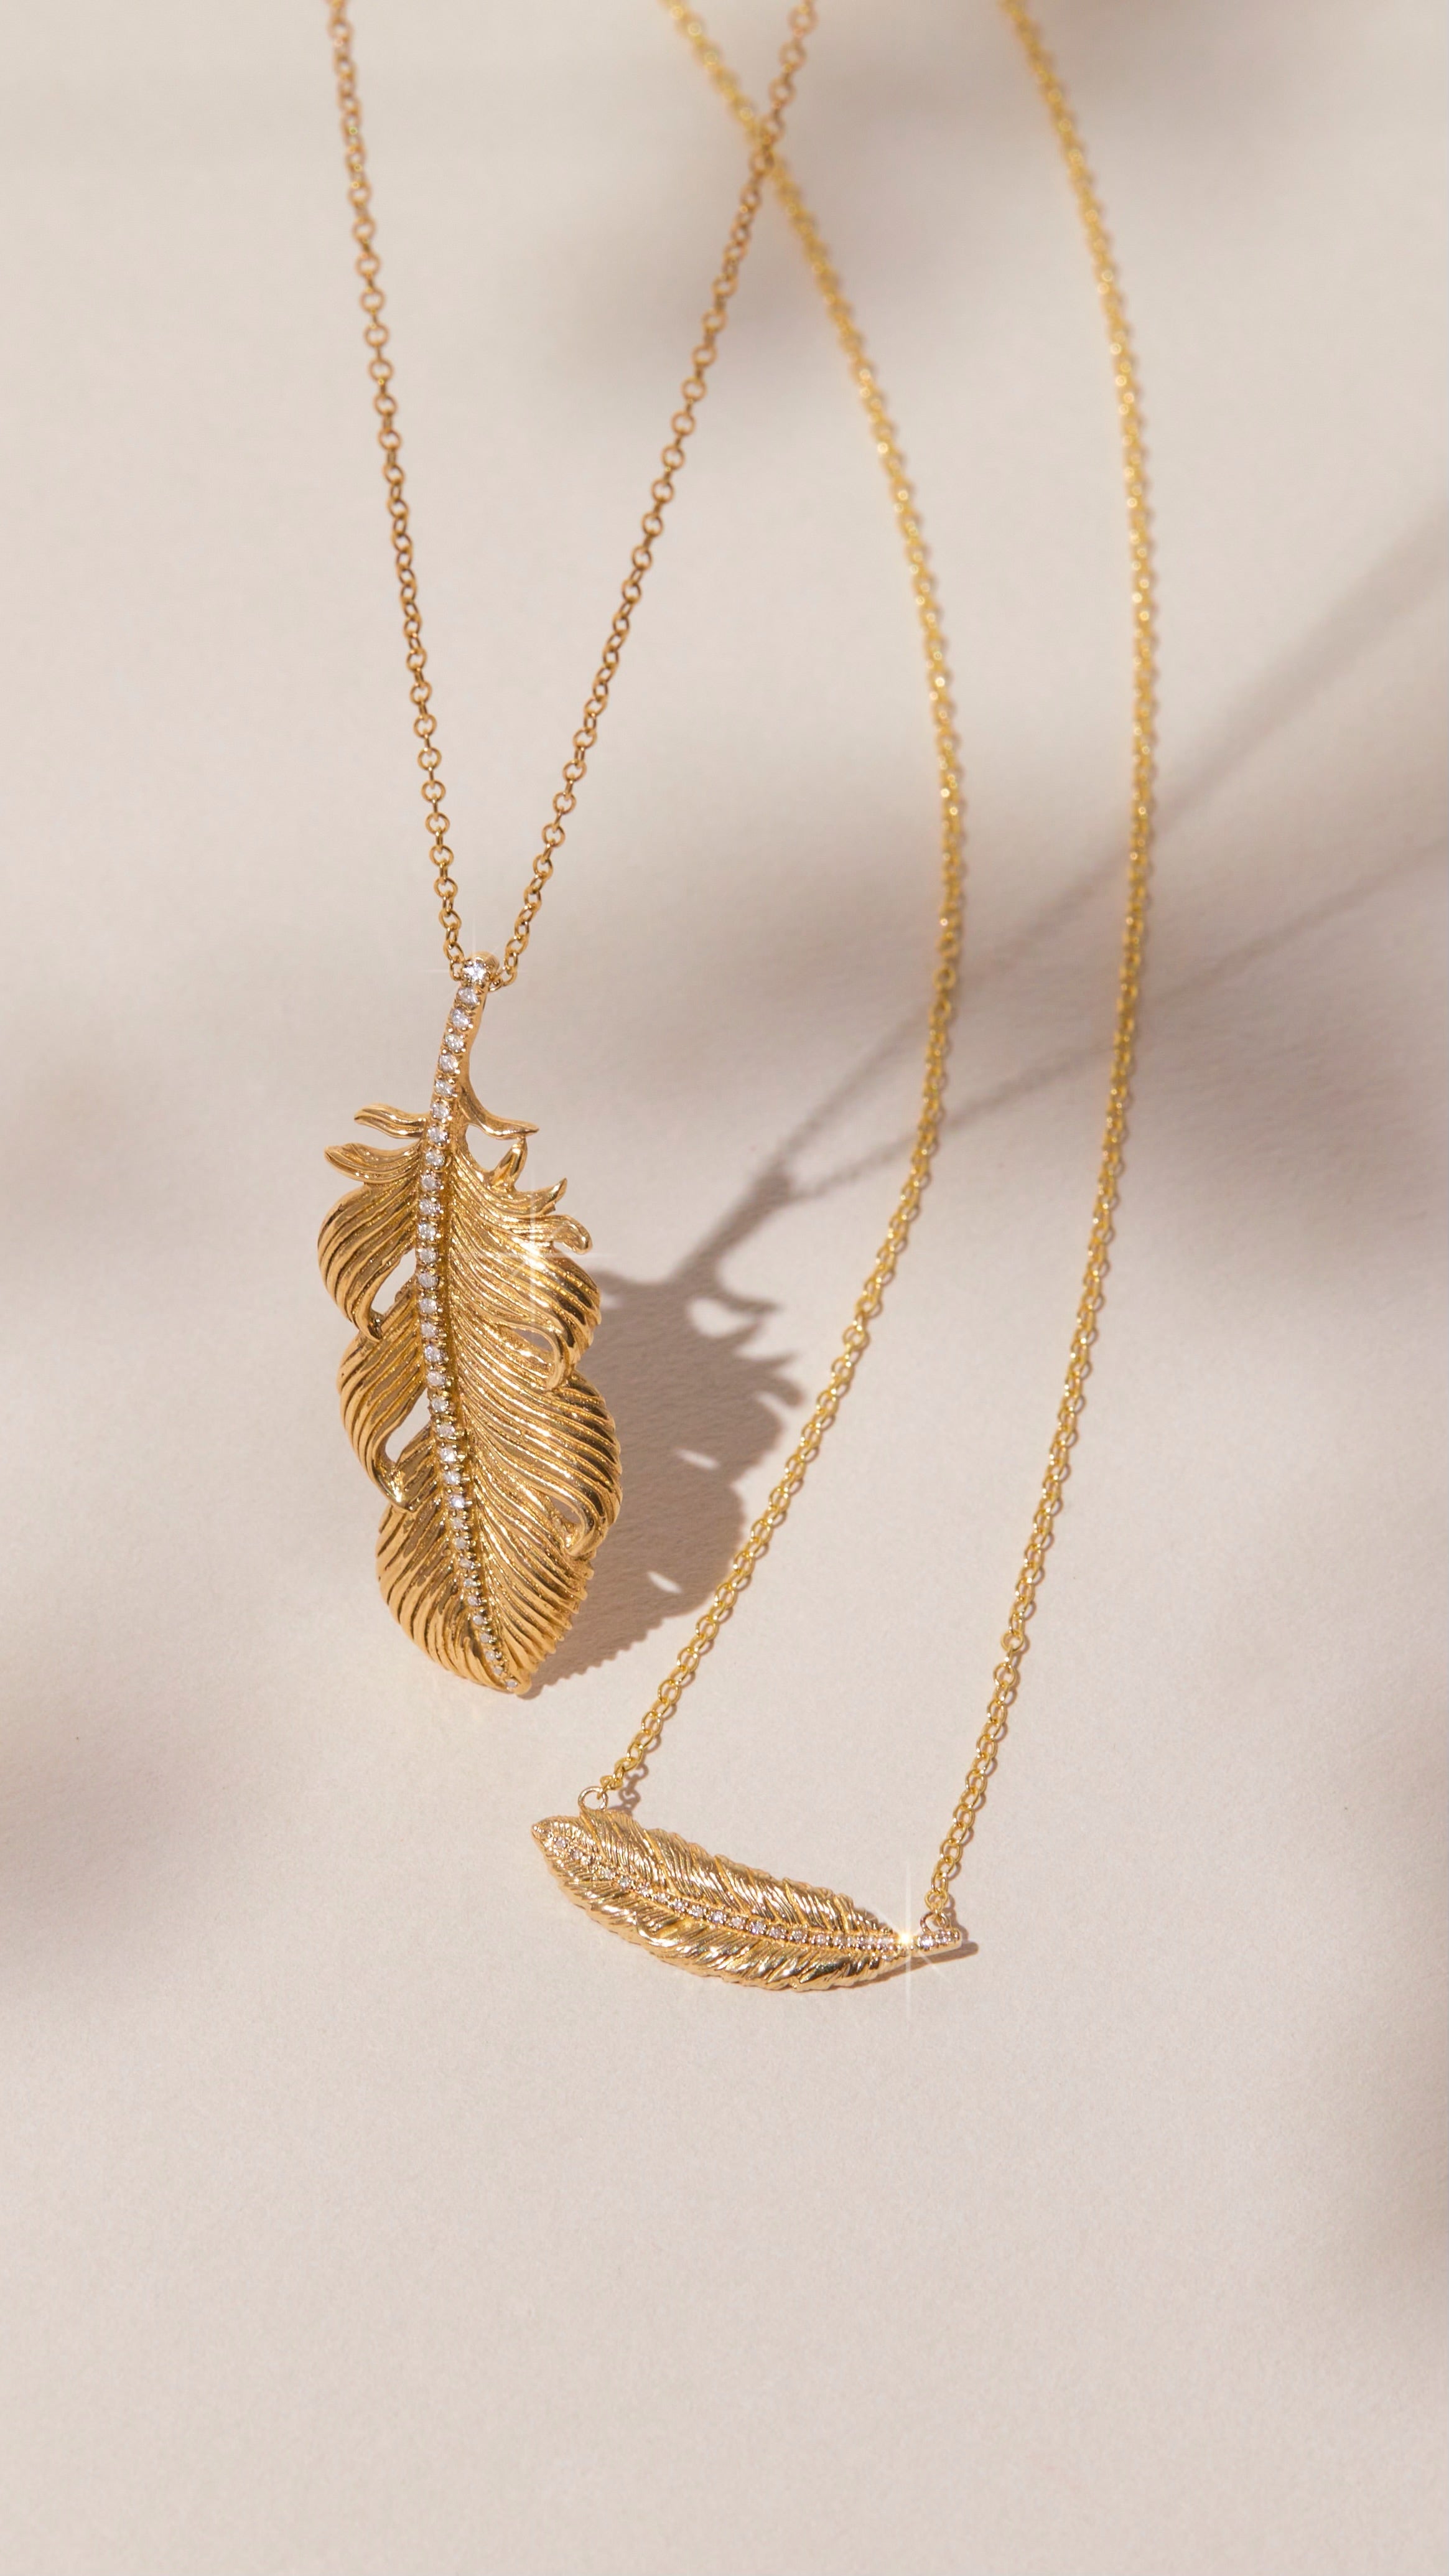 Large Feather Necklace Pendant Elisabeth Bell Jewelry   